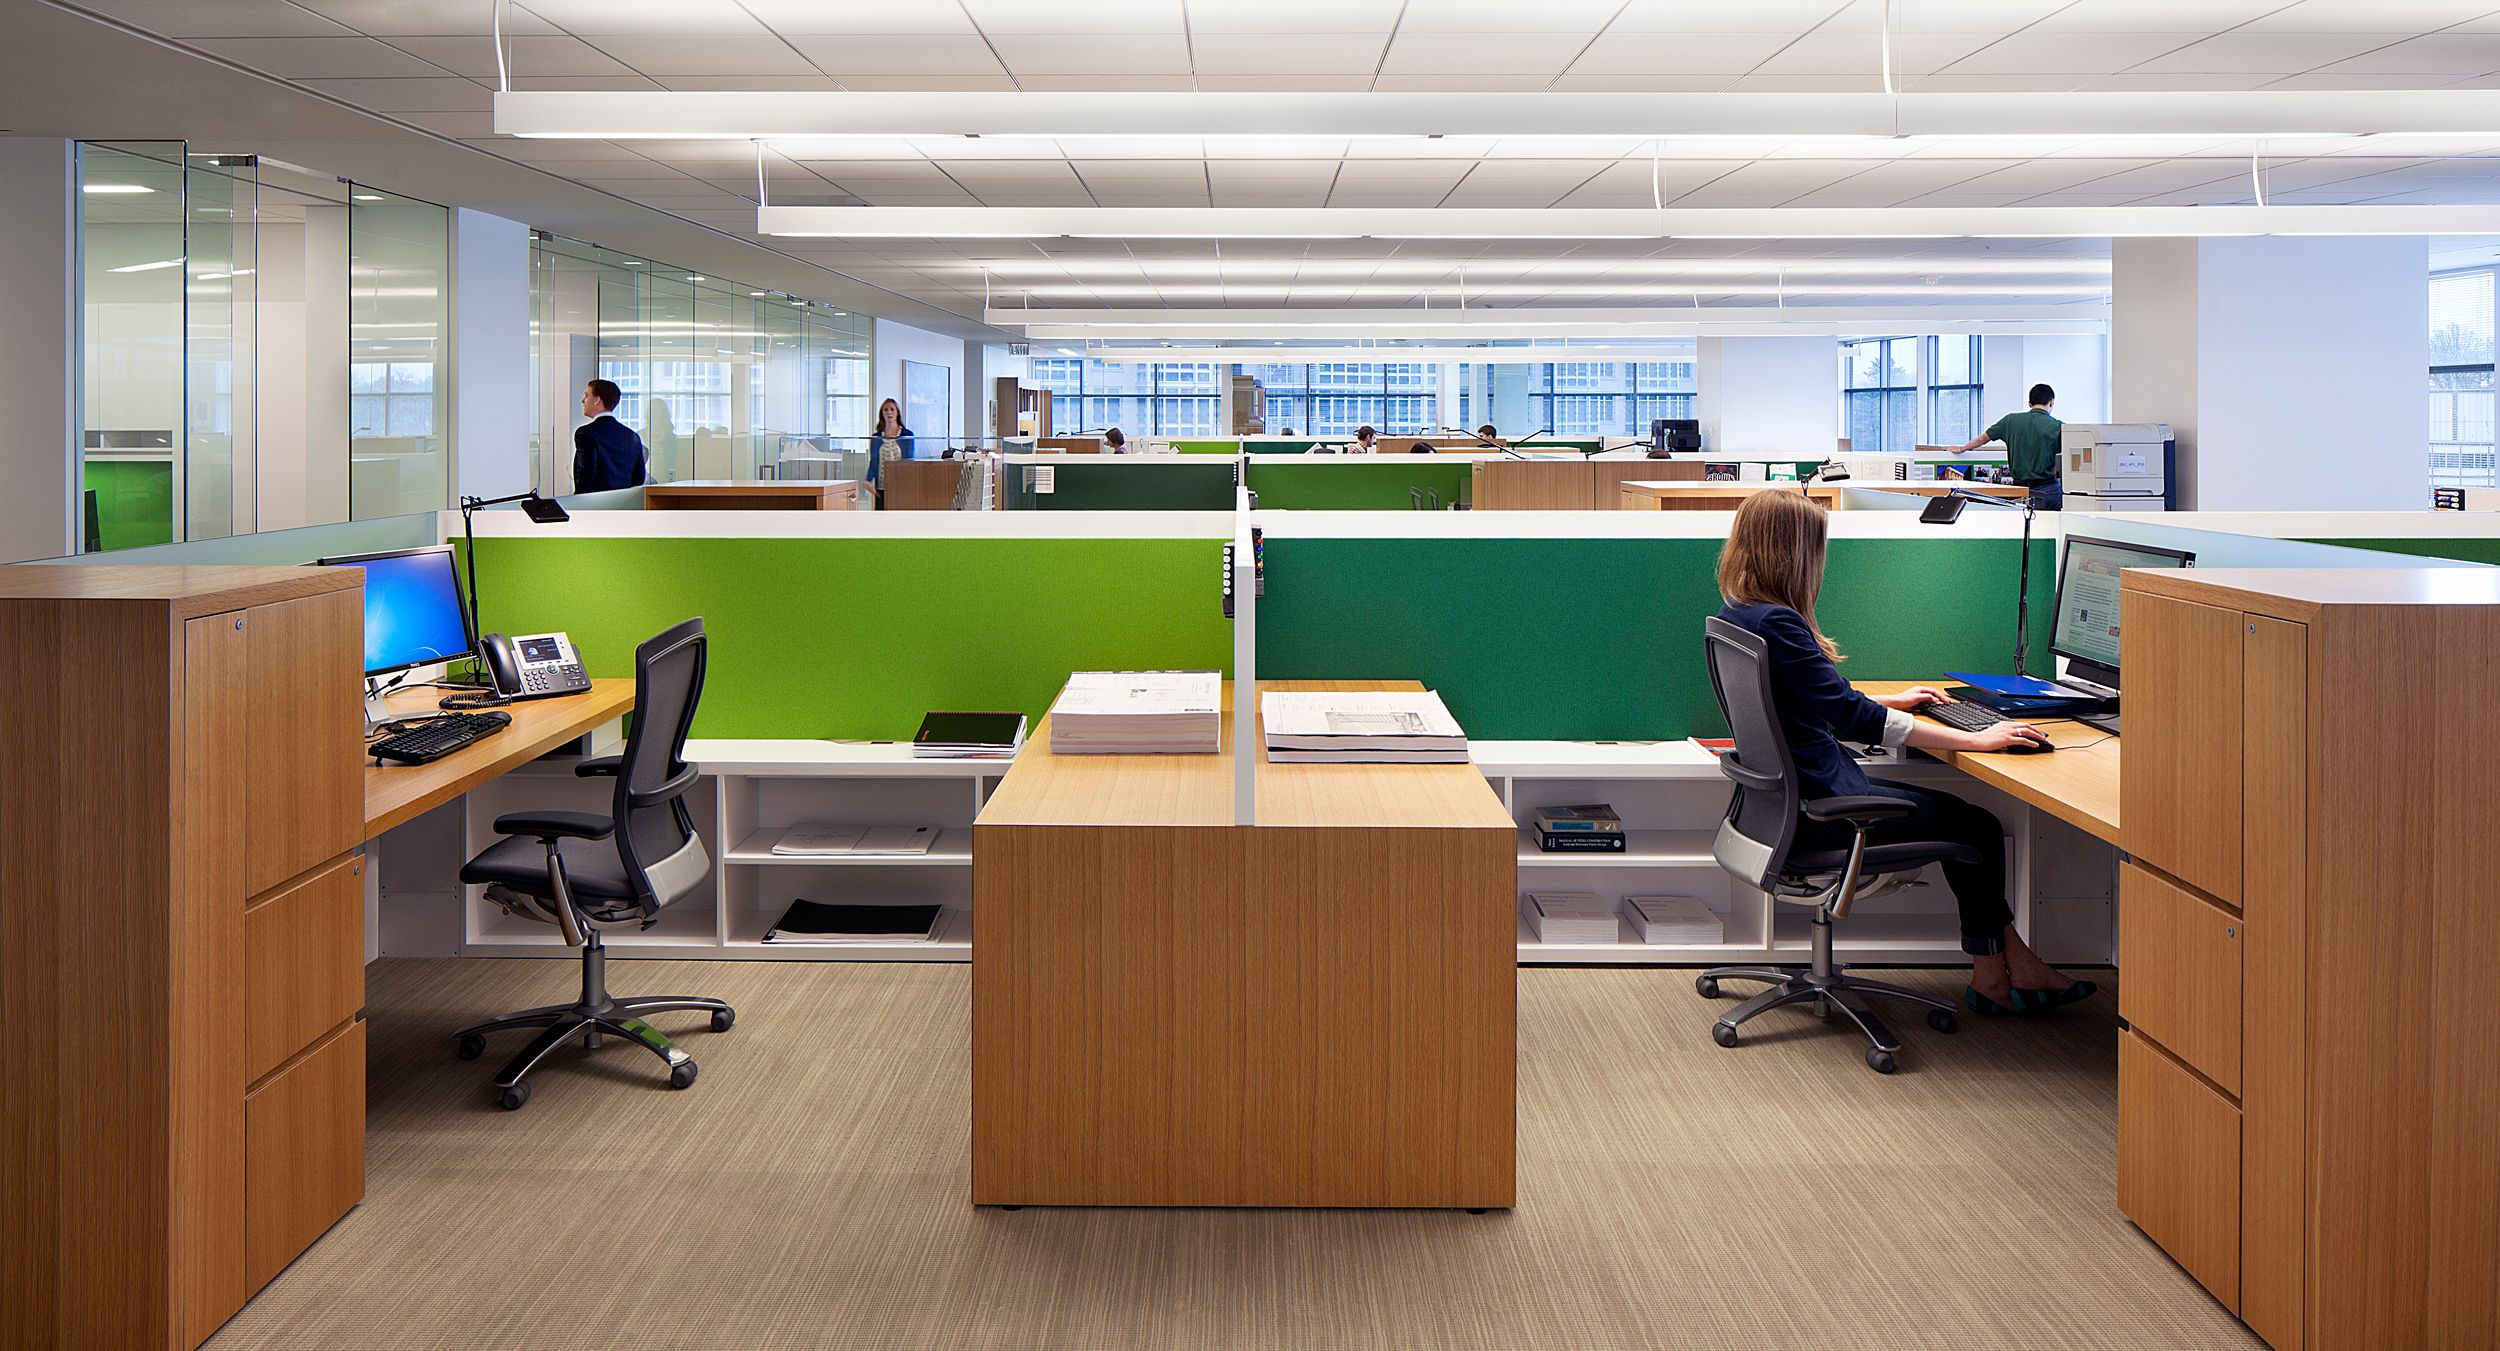 Each workstation cleanly integrates multiple storage options with glass, whiteboards, and tackable fabric to create a bright, beautiful, and functional open plan solution.